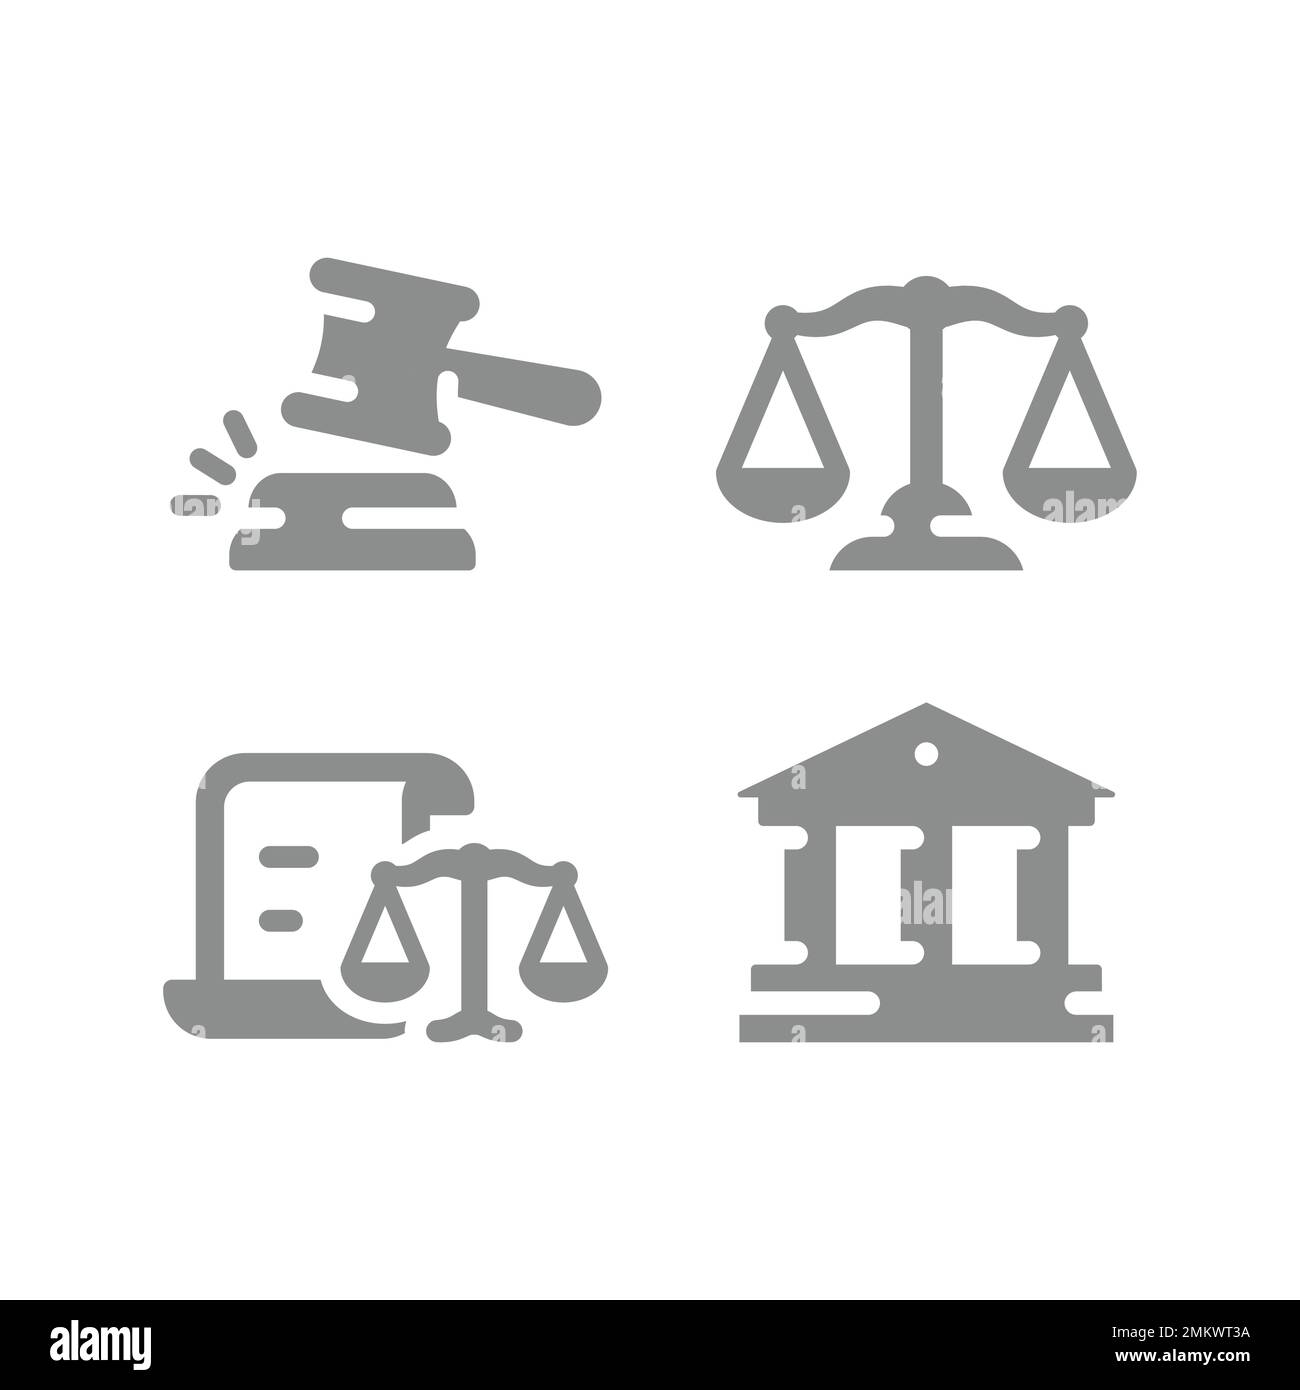 Law and legal or court filled icon set. Courthouse, justice scales and hammer fill icons. Stock Vector